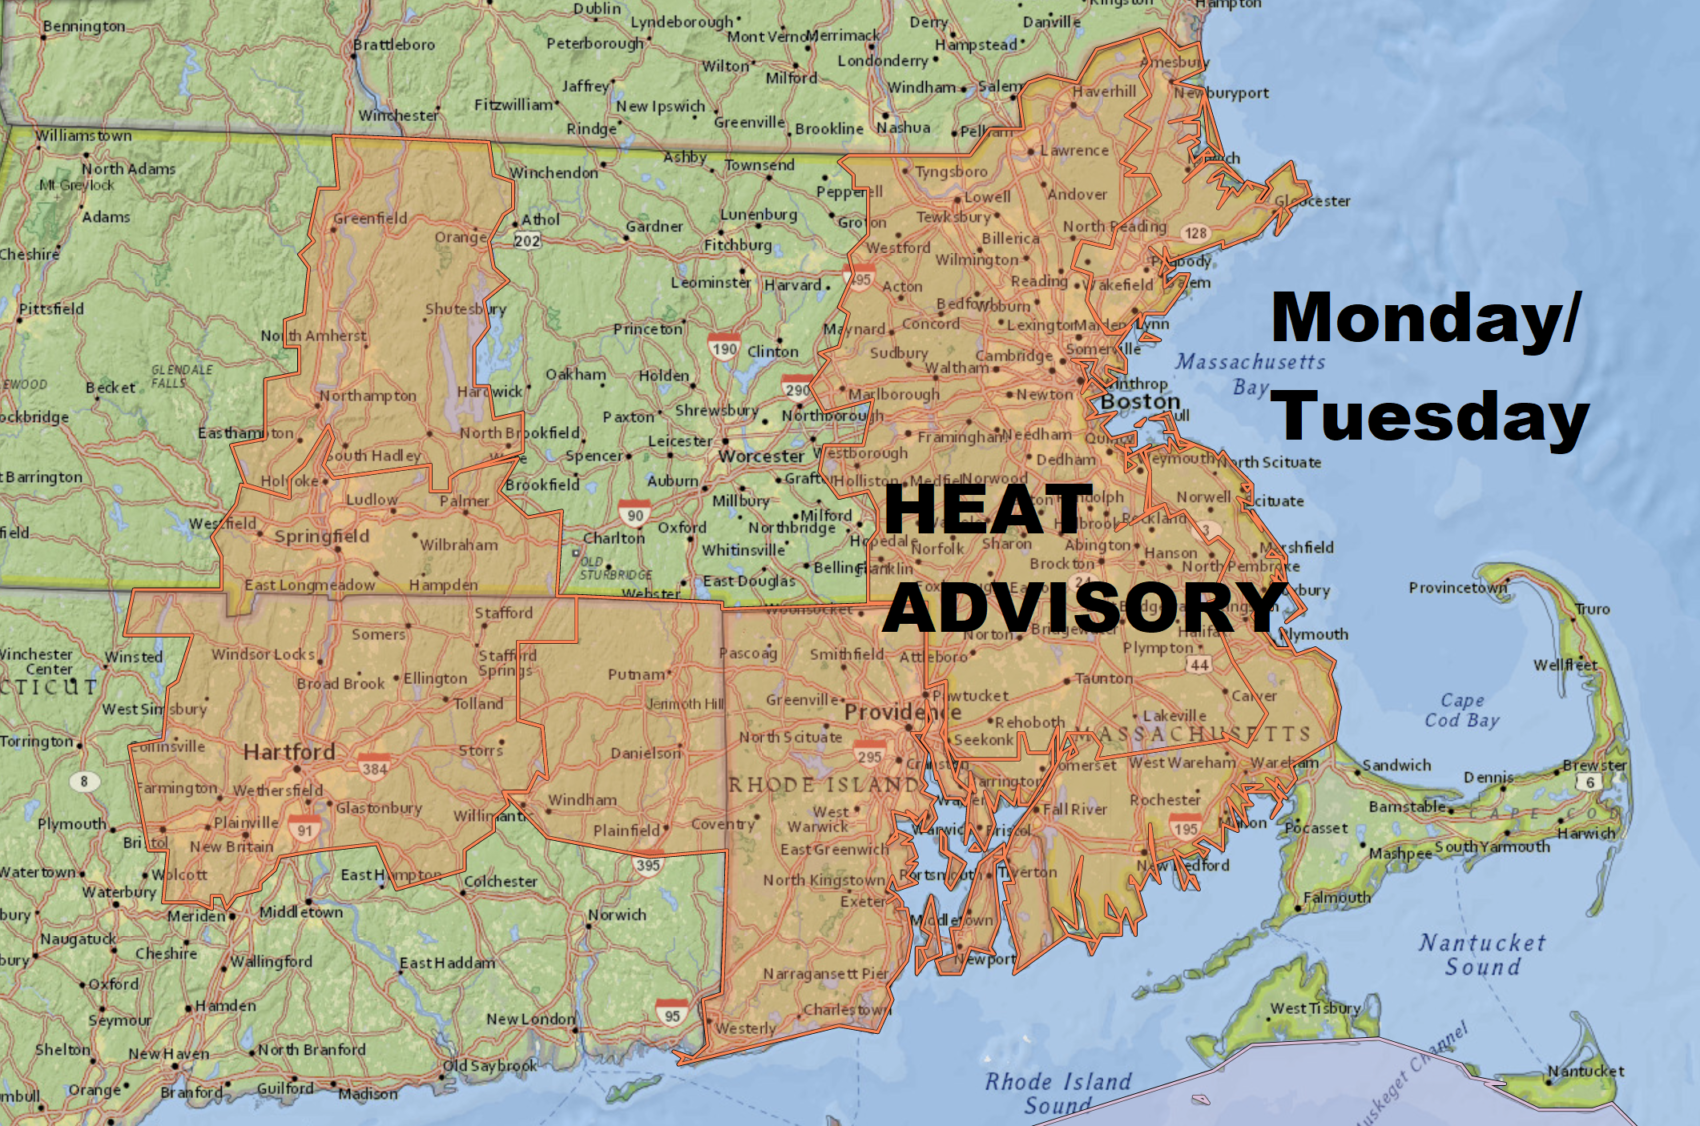 Heat Advisories are posted for the most populous areas of southern New England. (Courtesy NOAA)